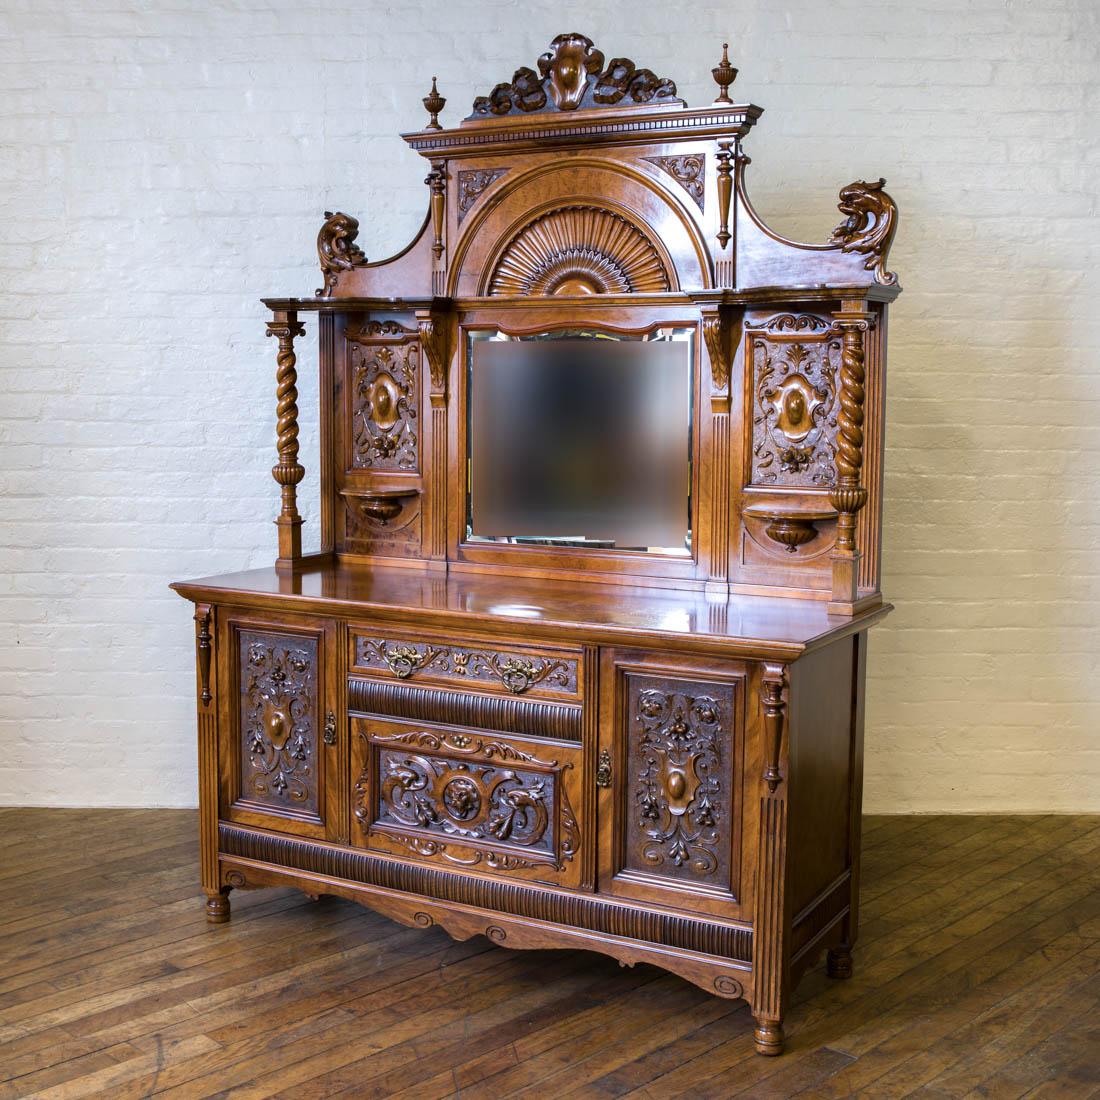 A very attractive mahogany ladies writing desk with a strong French Rococo influence. It has two side drawers and a central compartment fitted for letters and an inkwell. The top has a new tooled leather writing surface and the whole is in very good